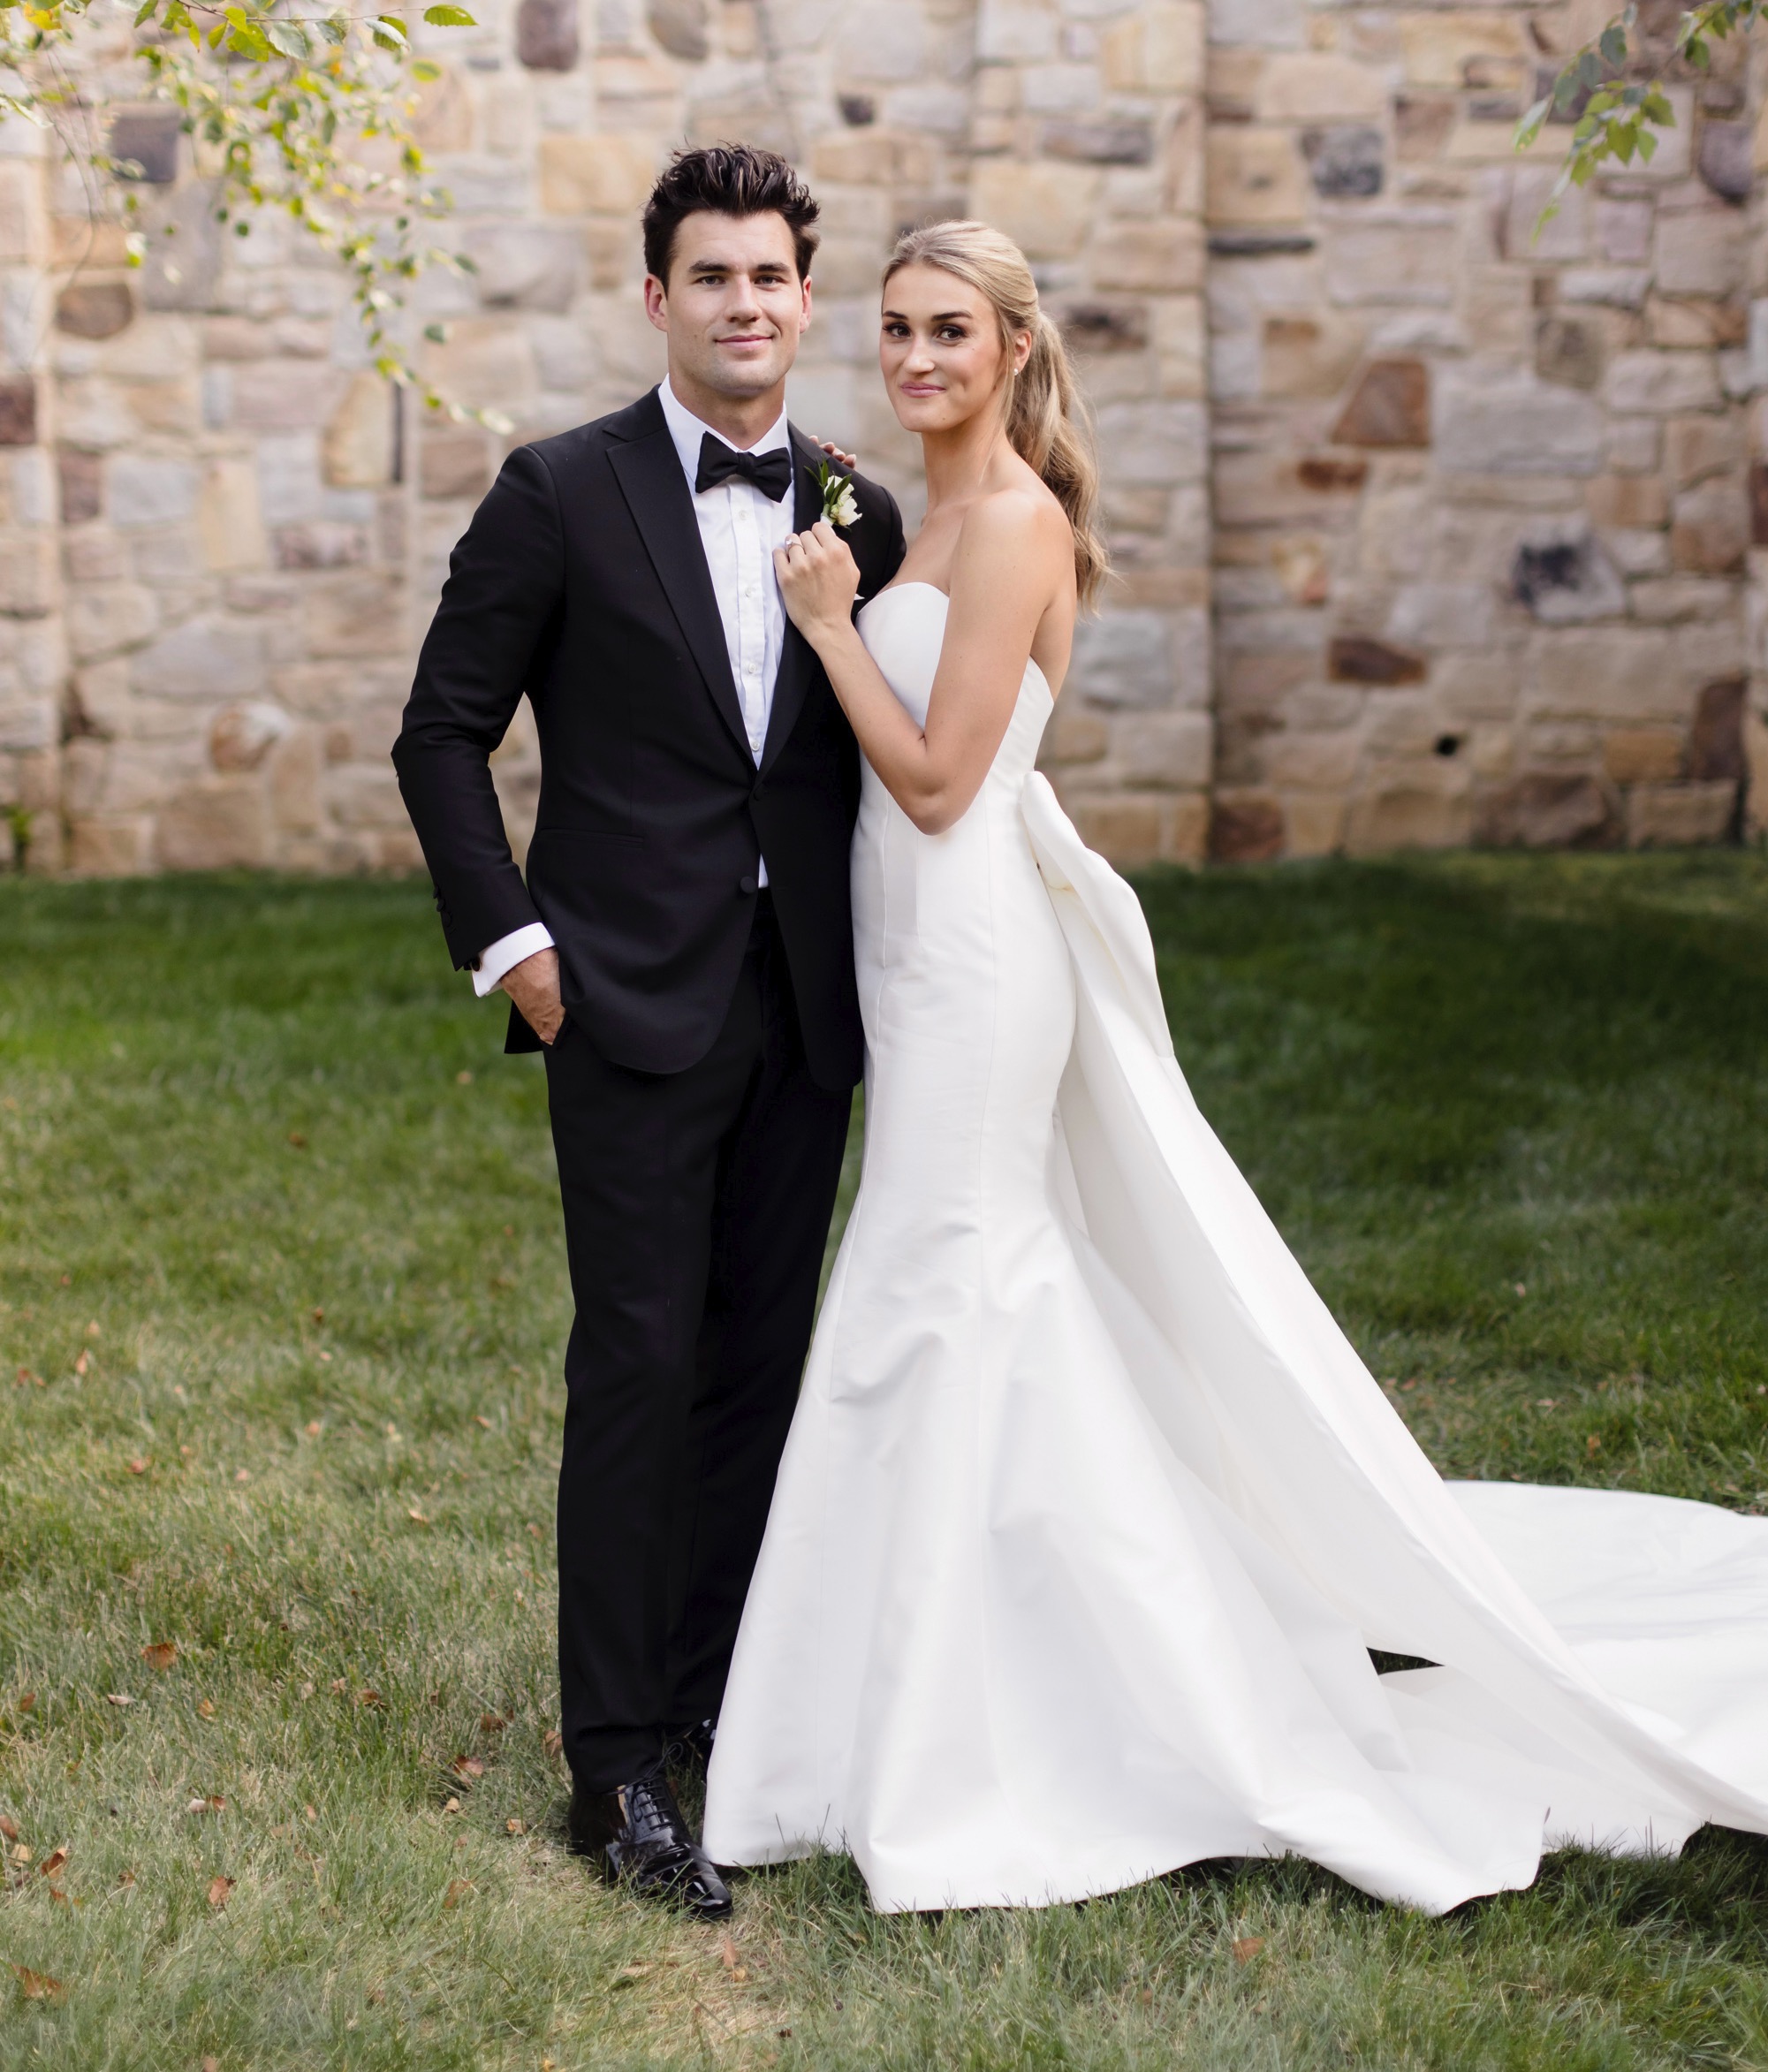 Tom Wilson is getting married to Taylor Pischke today. The wedding